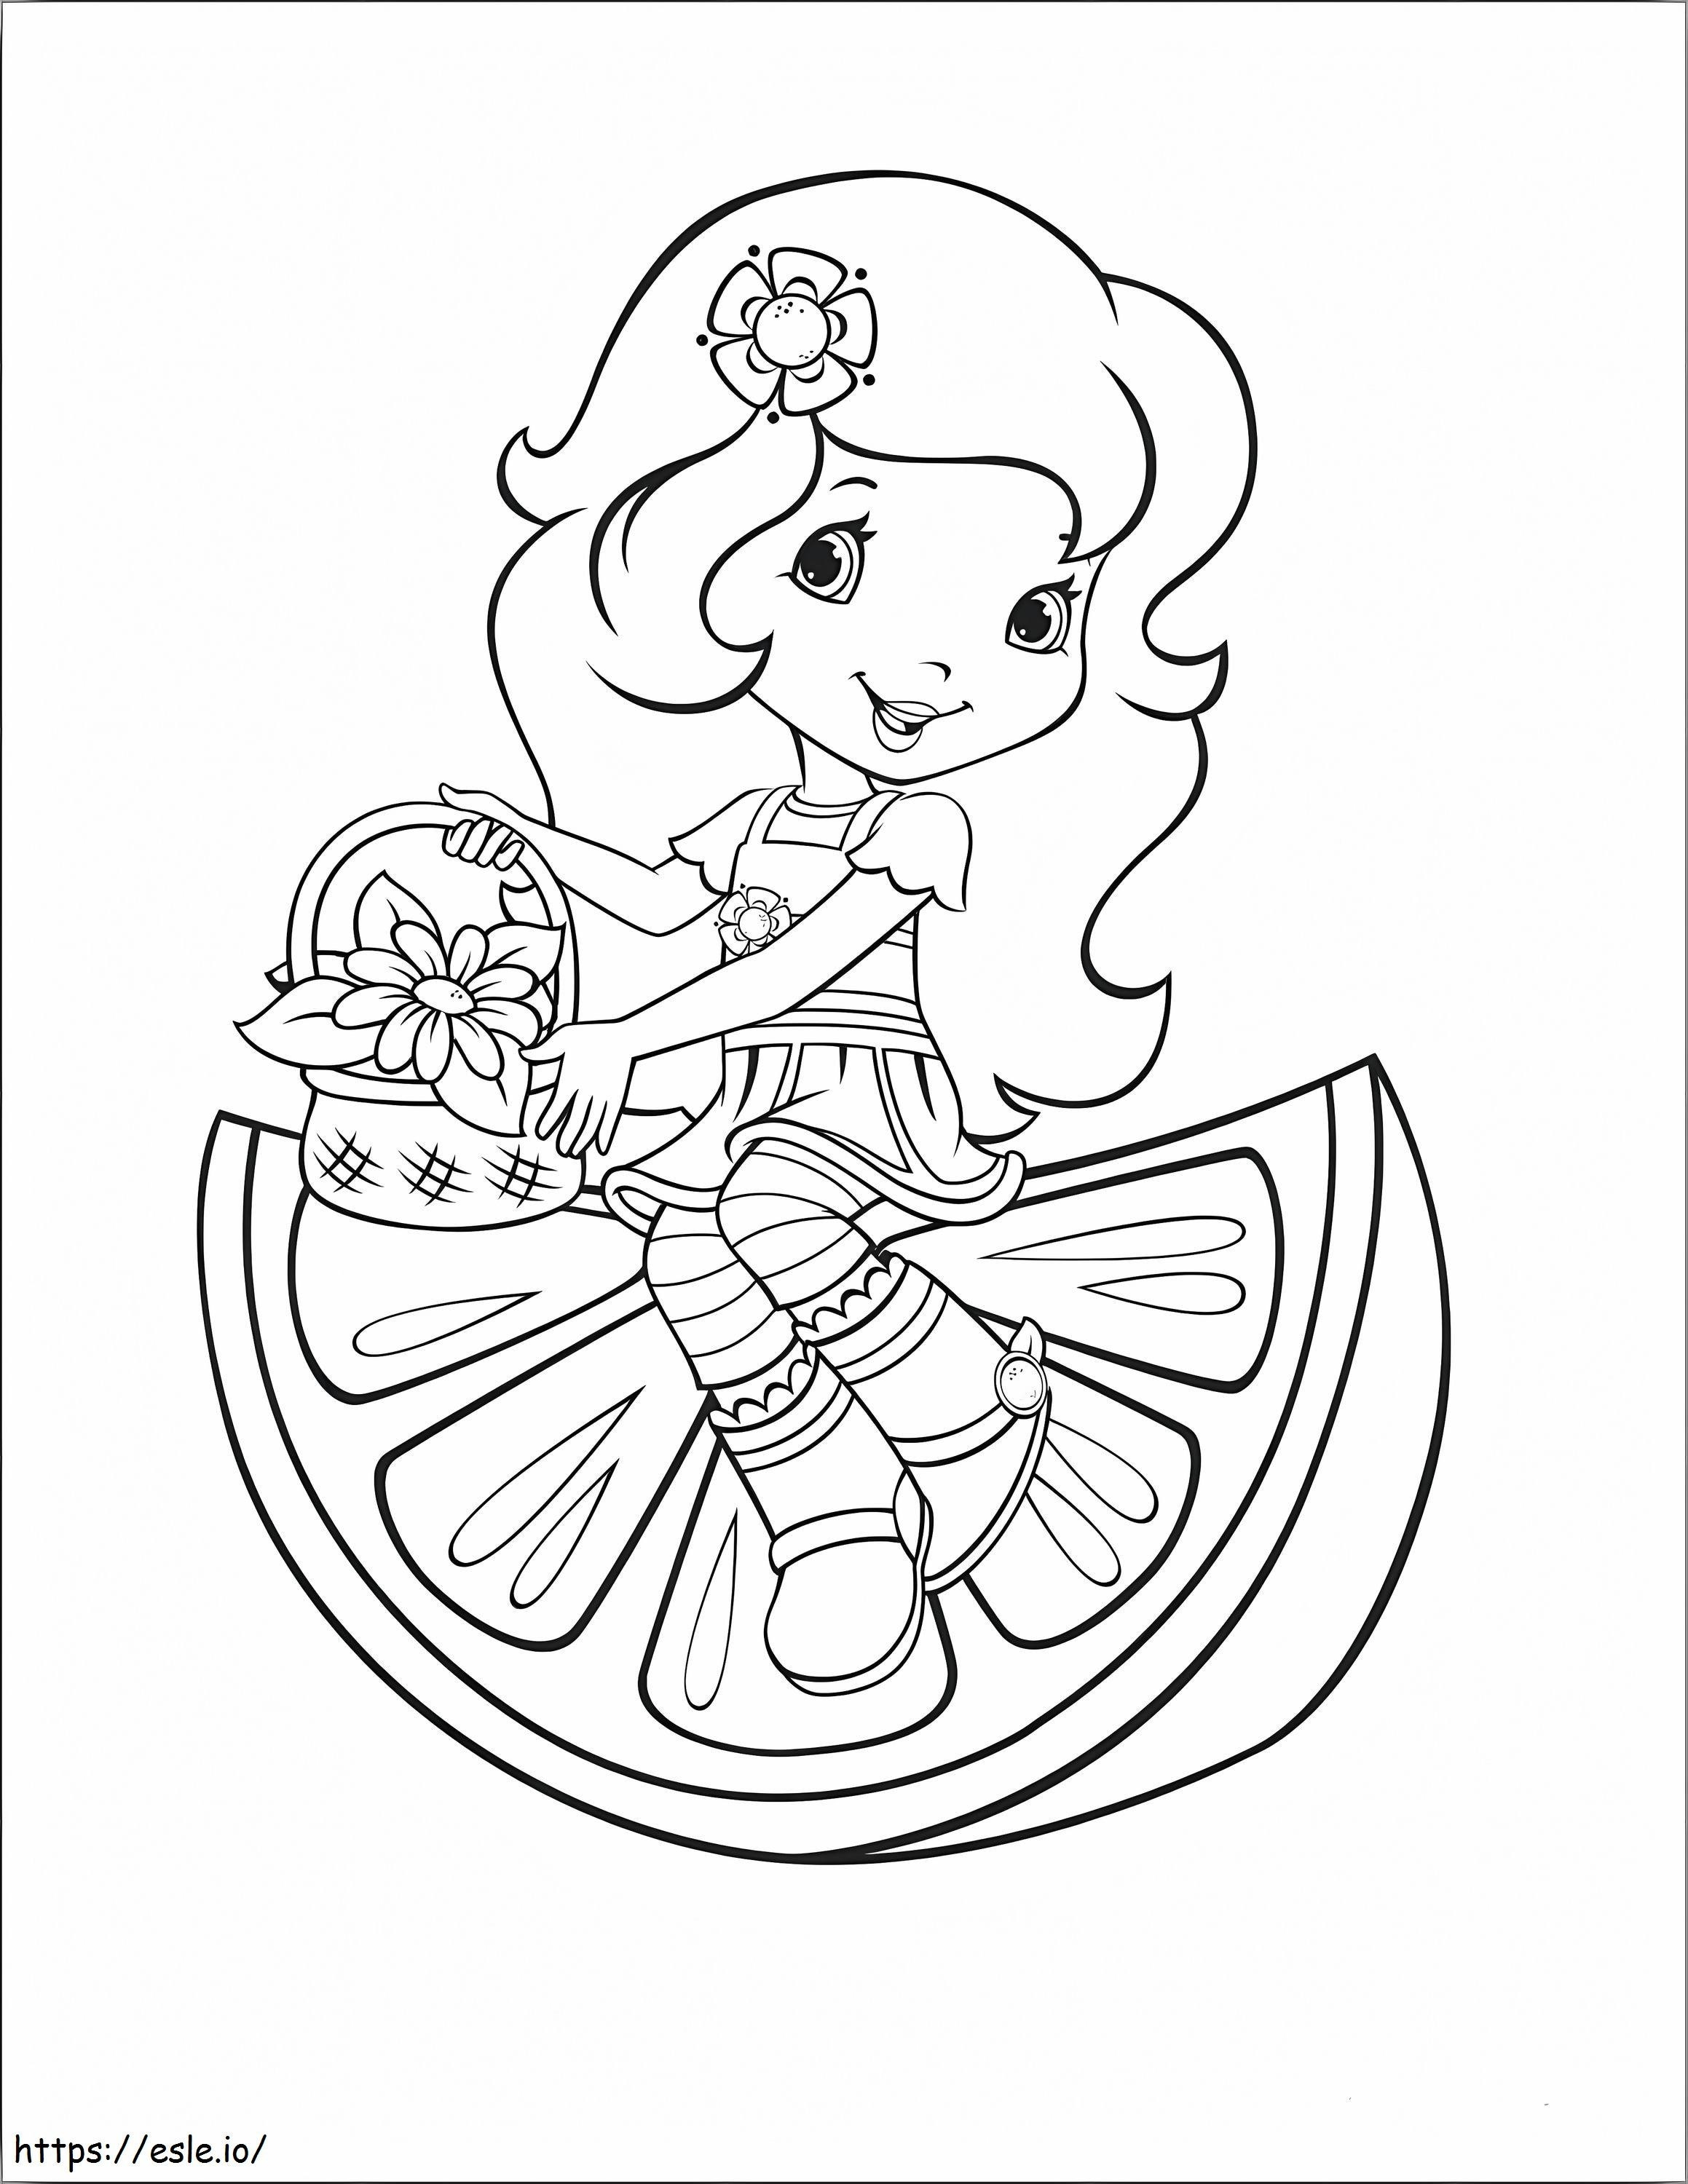 Strawberry Shortcake Sitting In Limon coloring page